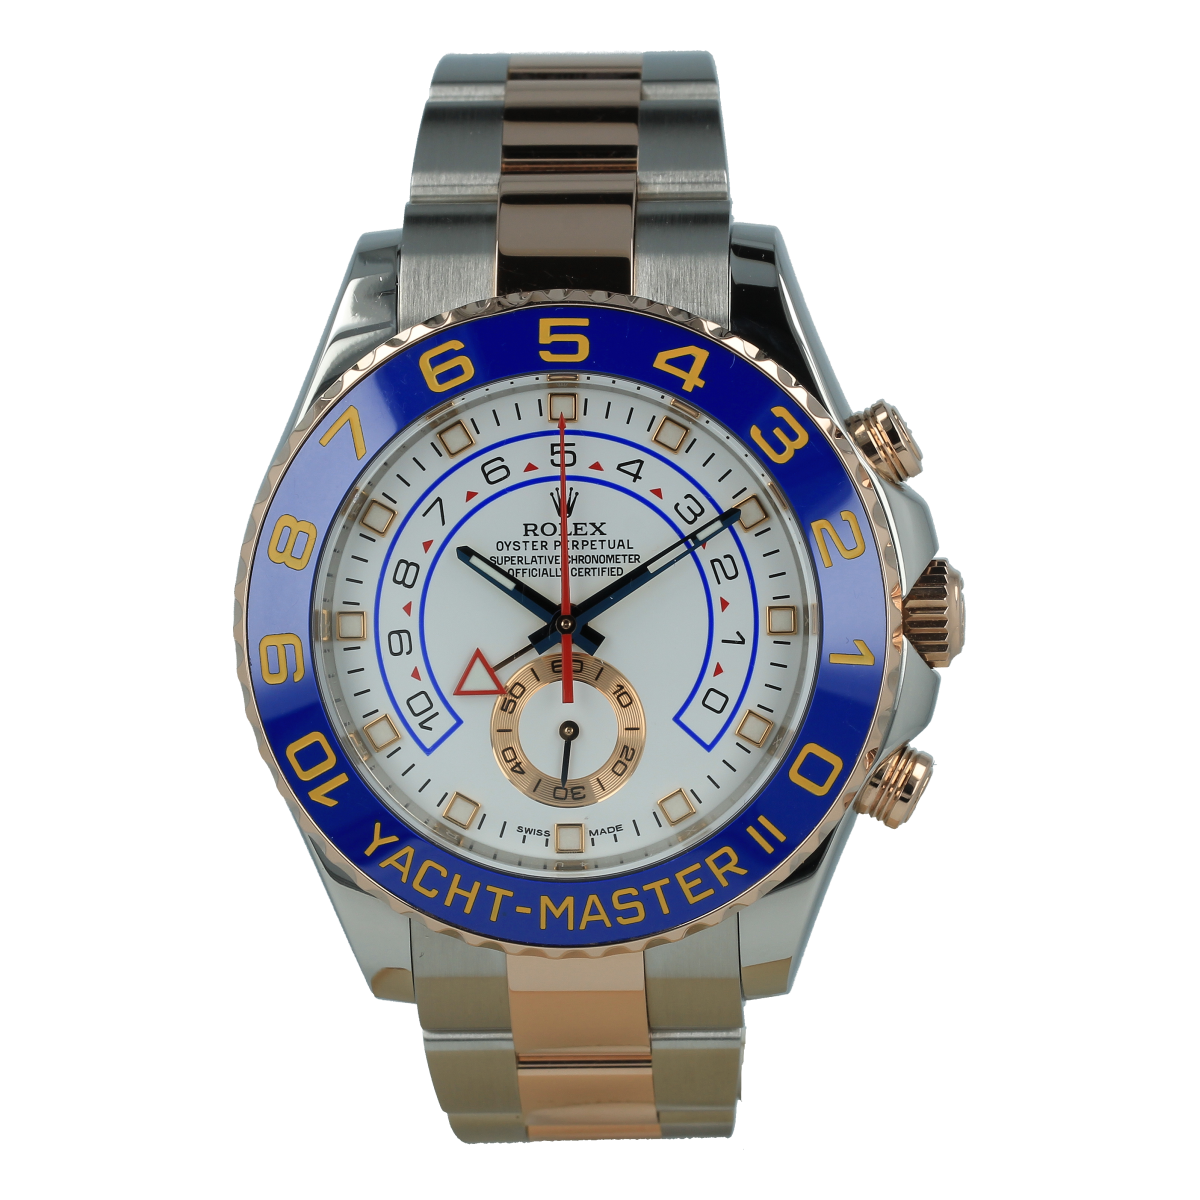 Rolex Yacht-Master II 116681 Steel and Everose Gold | Buy pre-owned Rolex watch